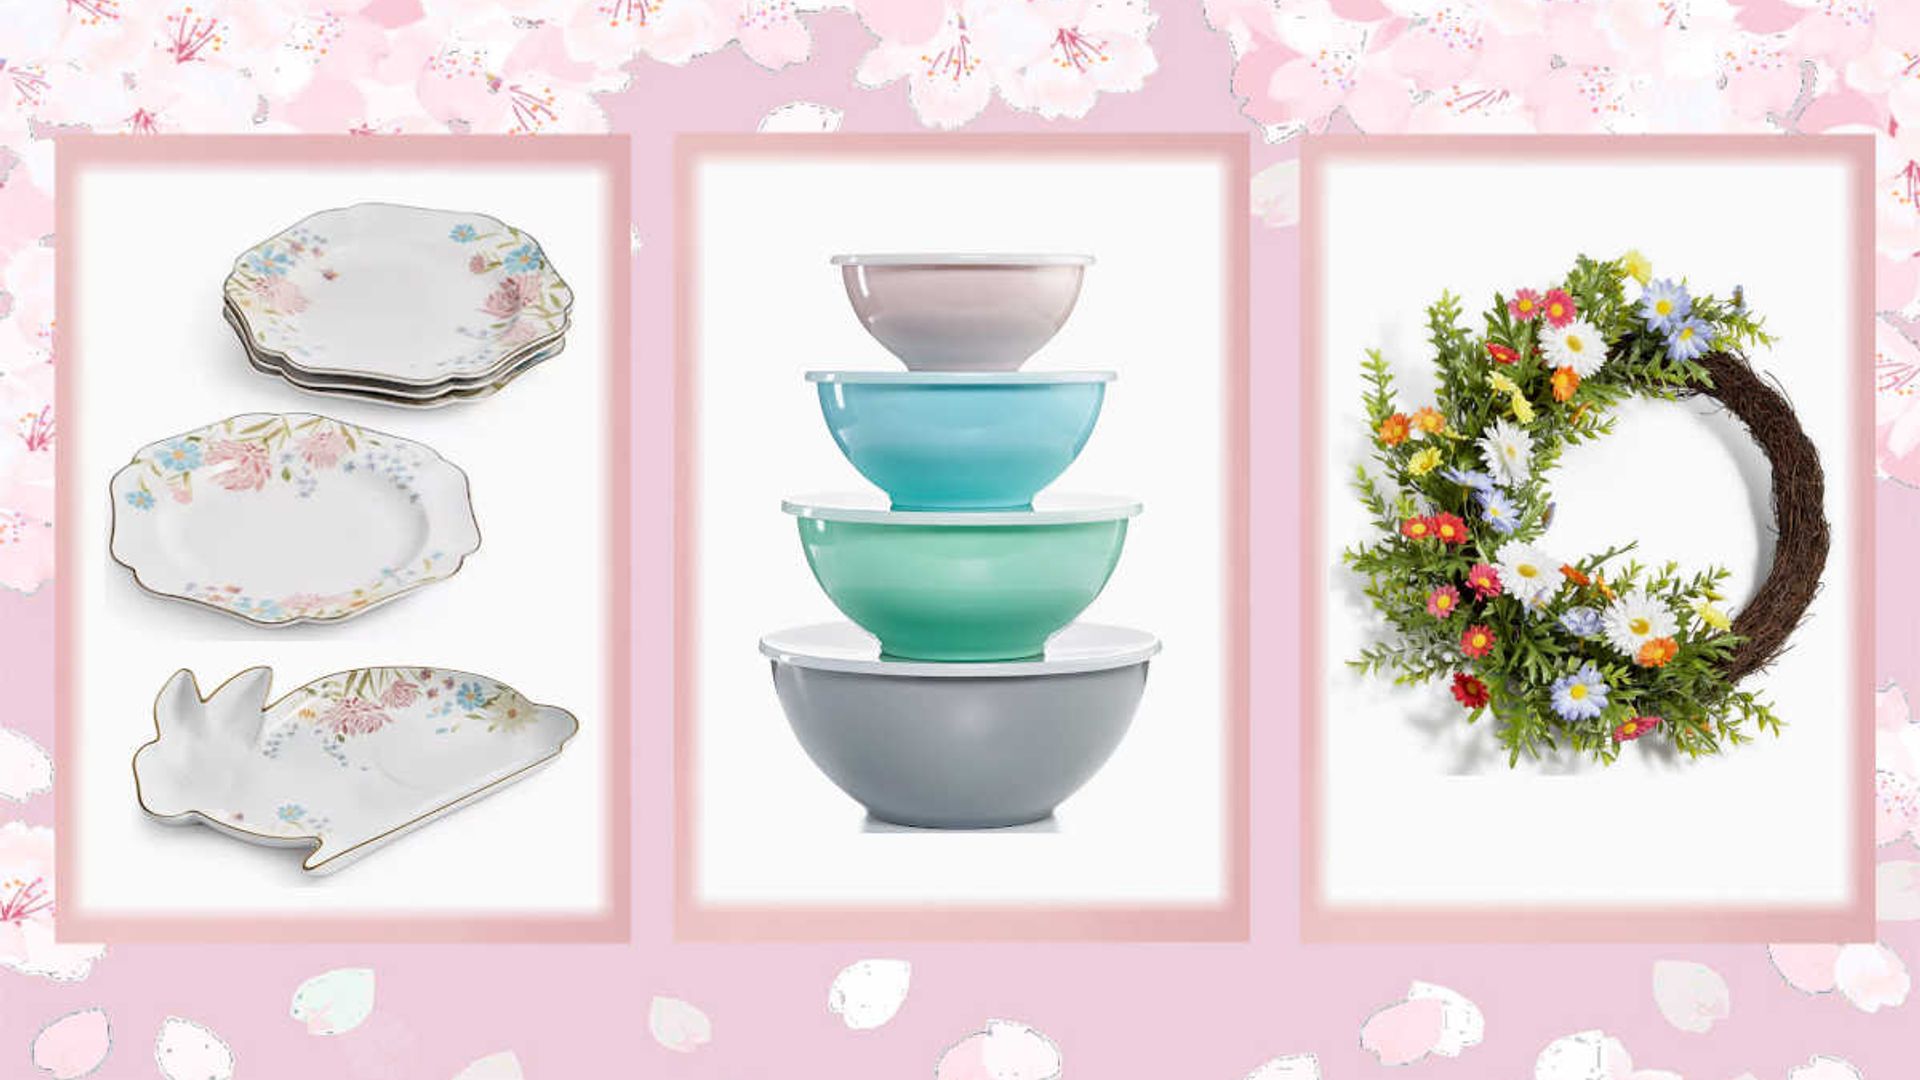 Martha Stewart's Easter collection is in the big Macy's sale